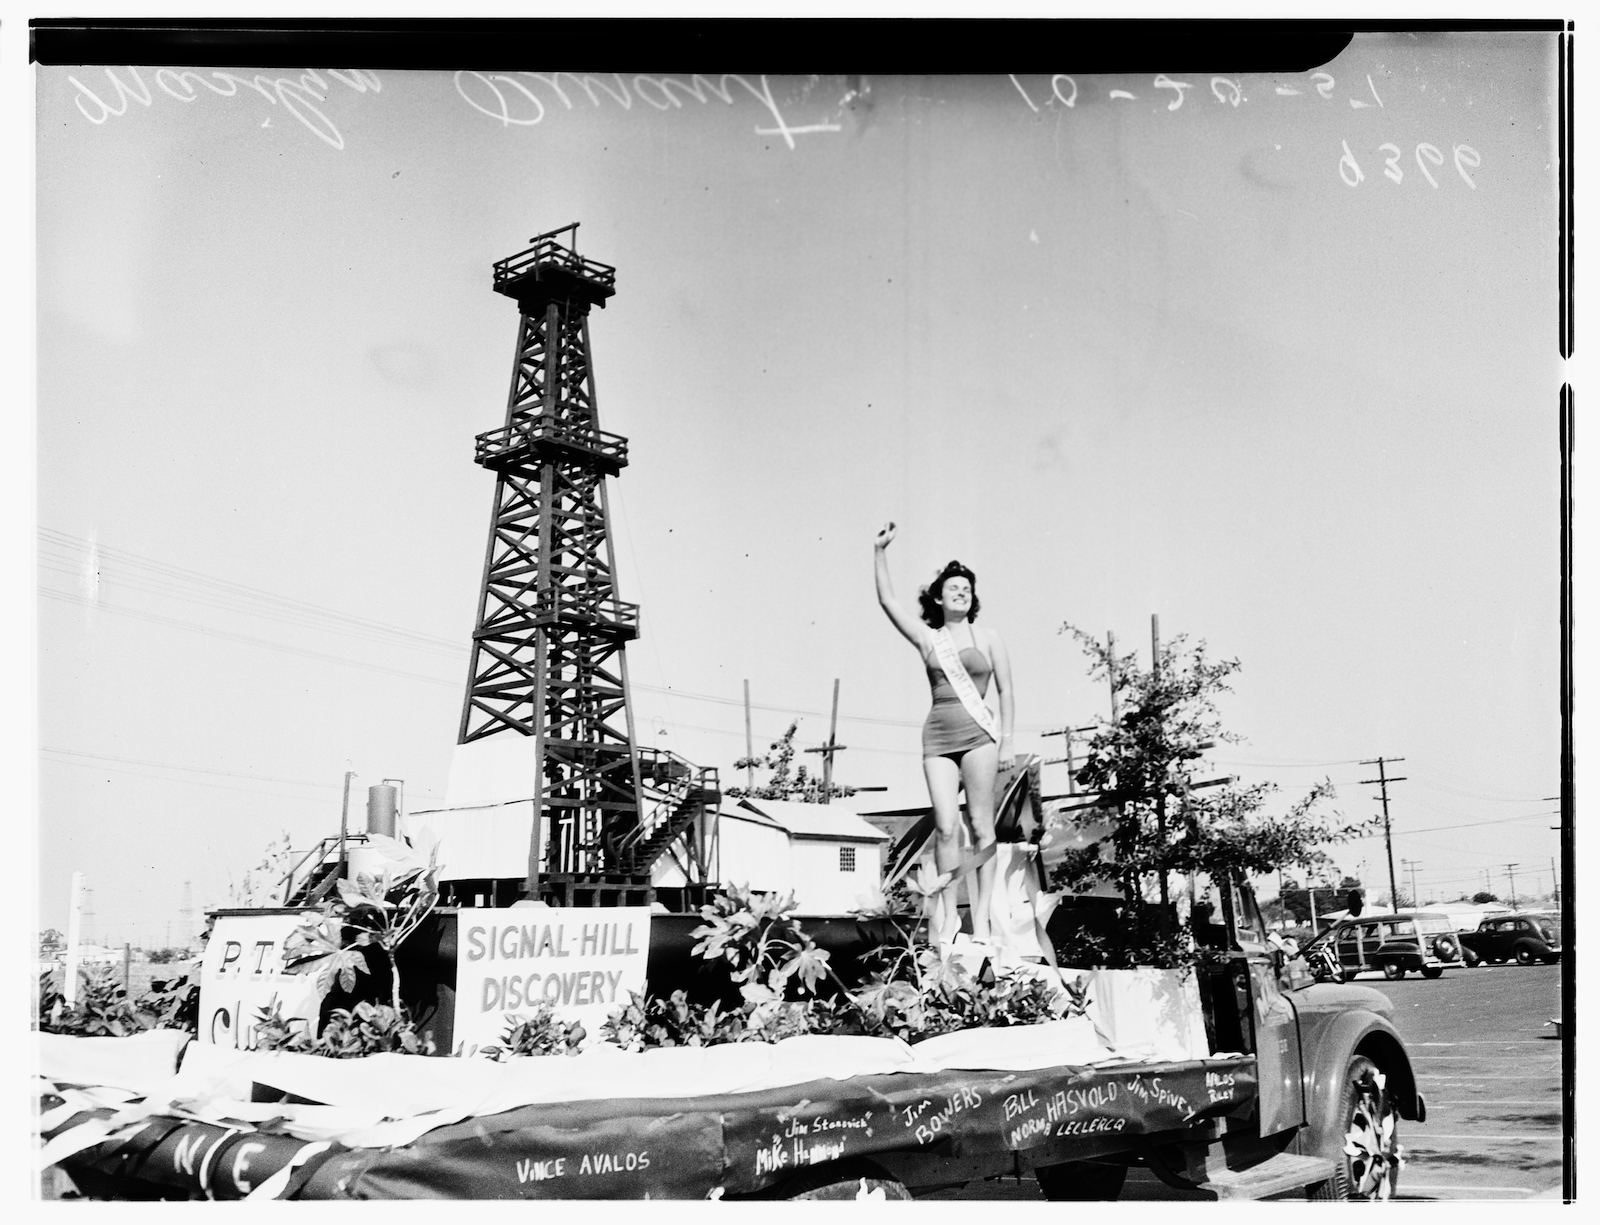 a black and white old photo of a woman on top of a parade float shaped like an oil well